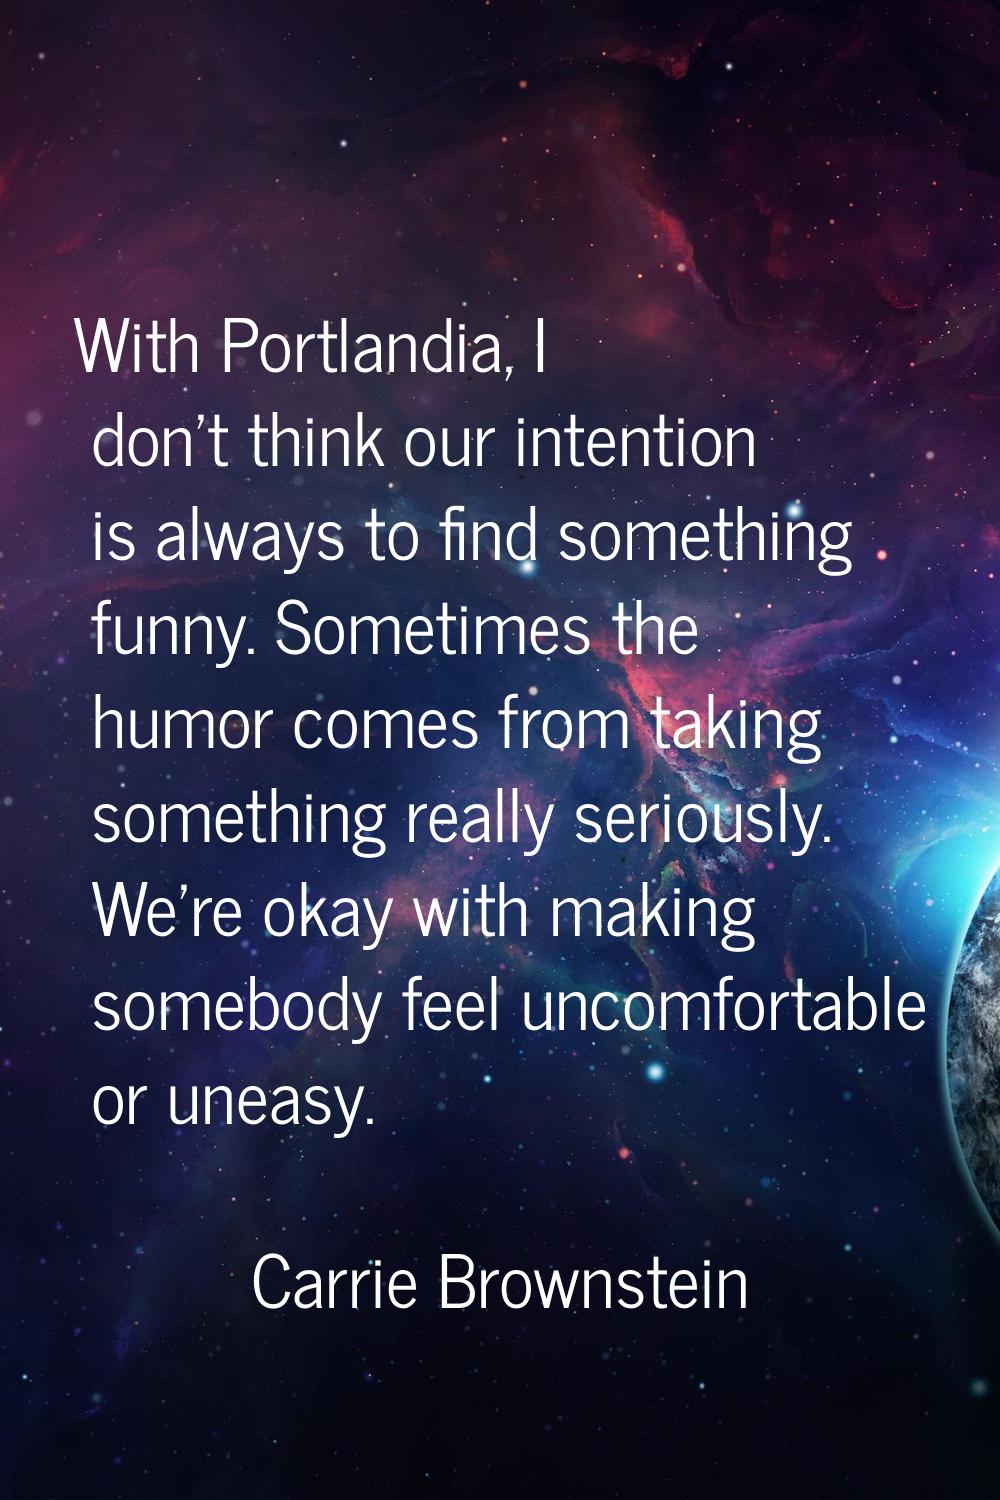 With Portlandia, I don't think our intention is always to find something funny. Sometimes the humor